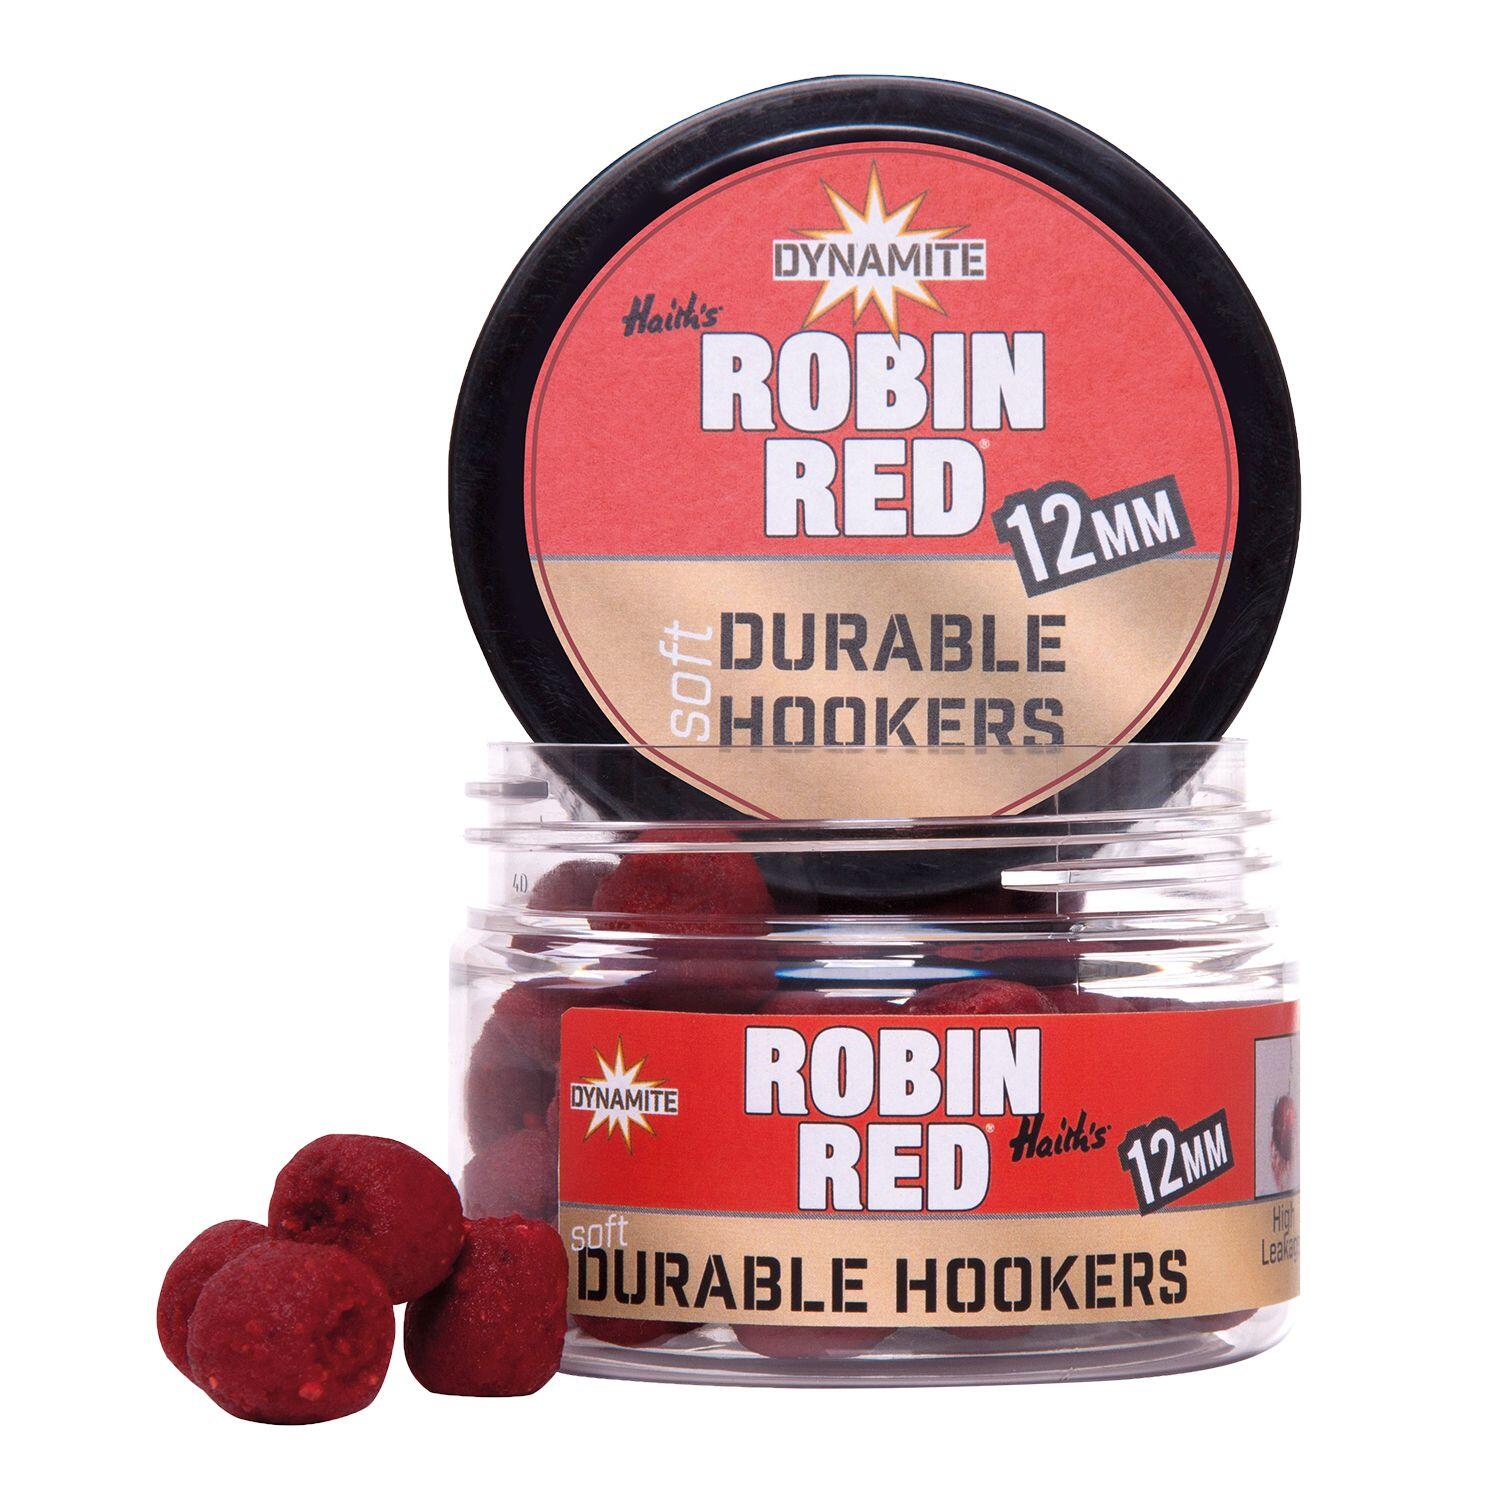 dynamite_robin_red_durable_hookers_dy1364_12mm_fishermania